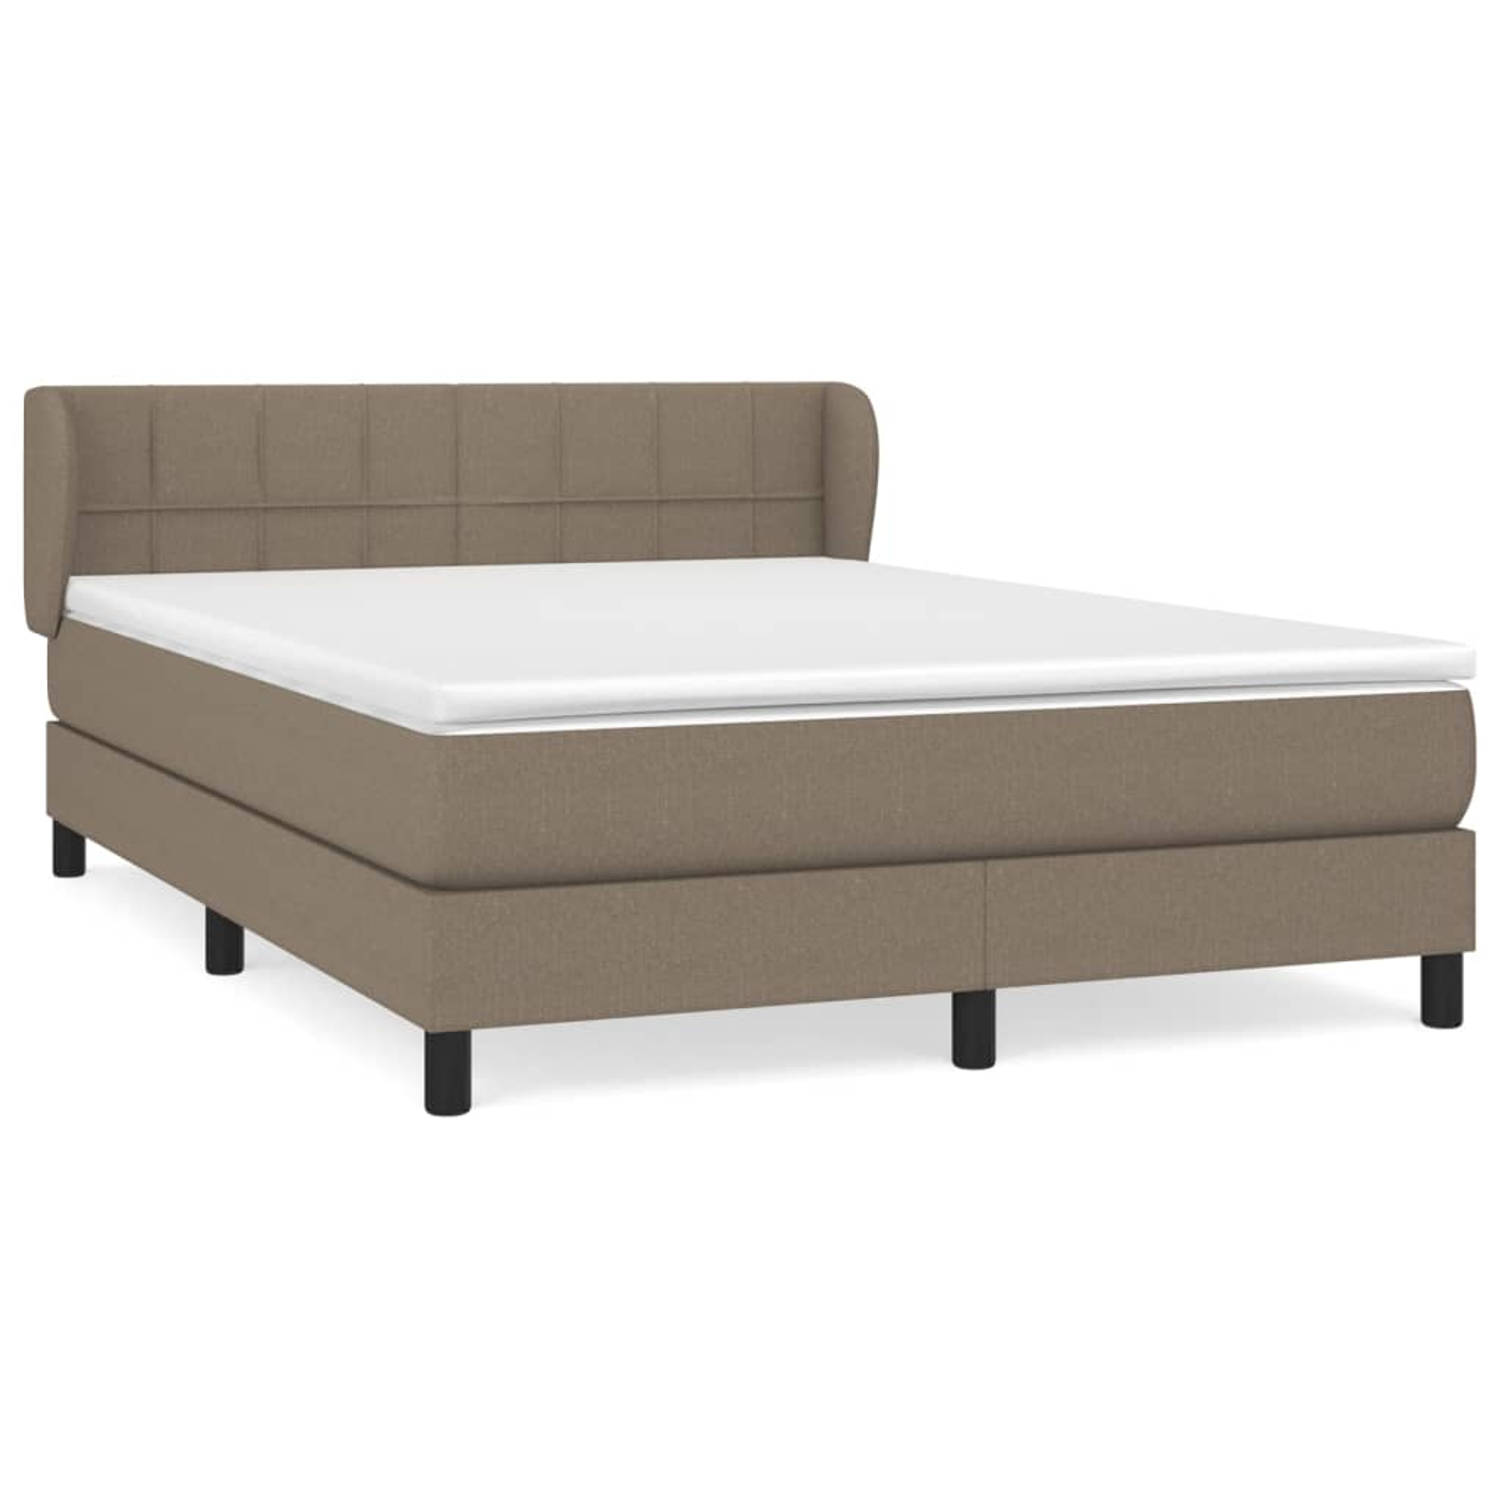 The Living Store Boxspringbed - Comfortabel en Duurzaam - 193 x 147 x 78/88 cm - Taupe